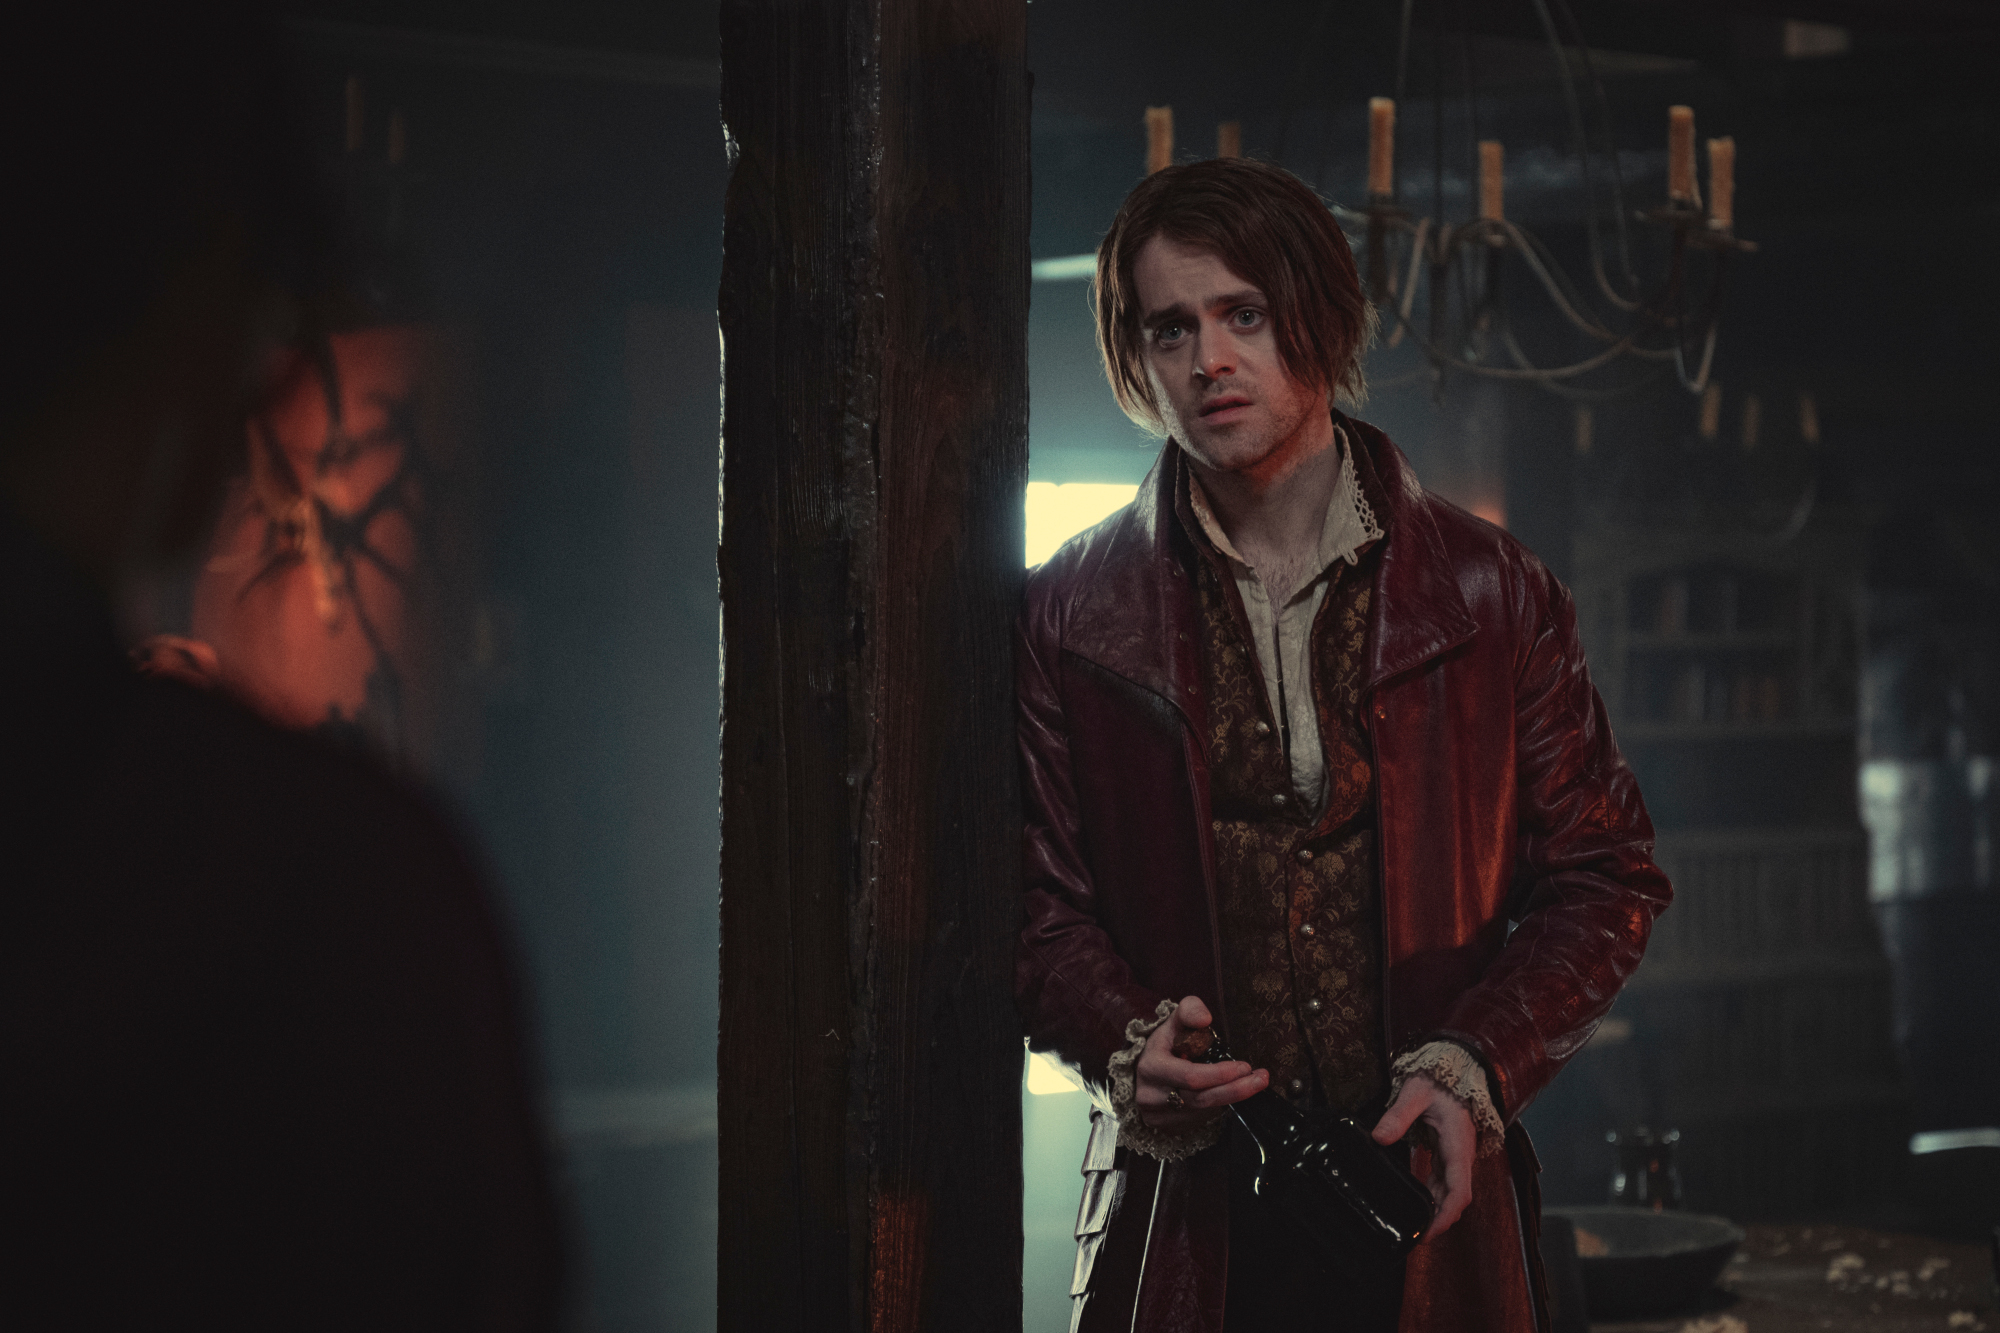 Joey Batey as Jaskier in 'The Witcher' Season 2 on Netflix. He's wearing a red leather coat and his hair is longer than in season 1.